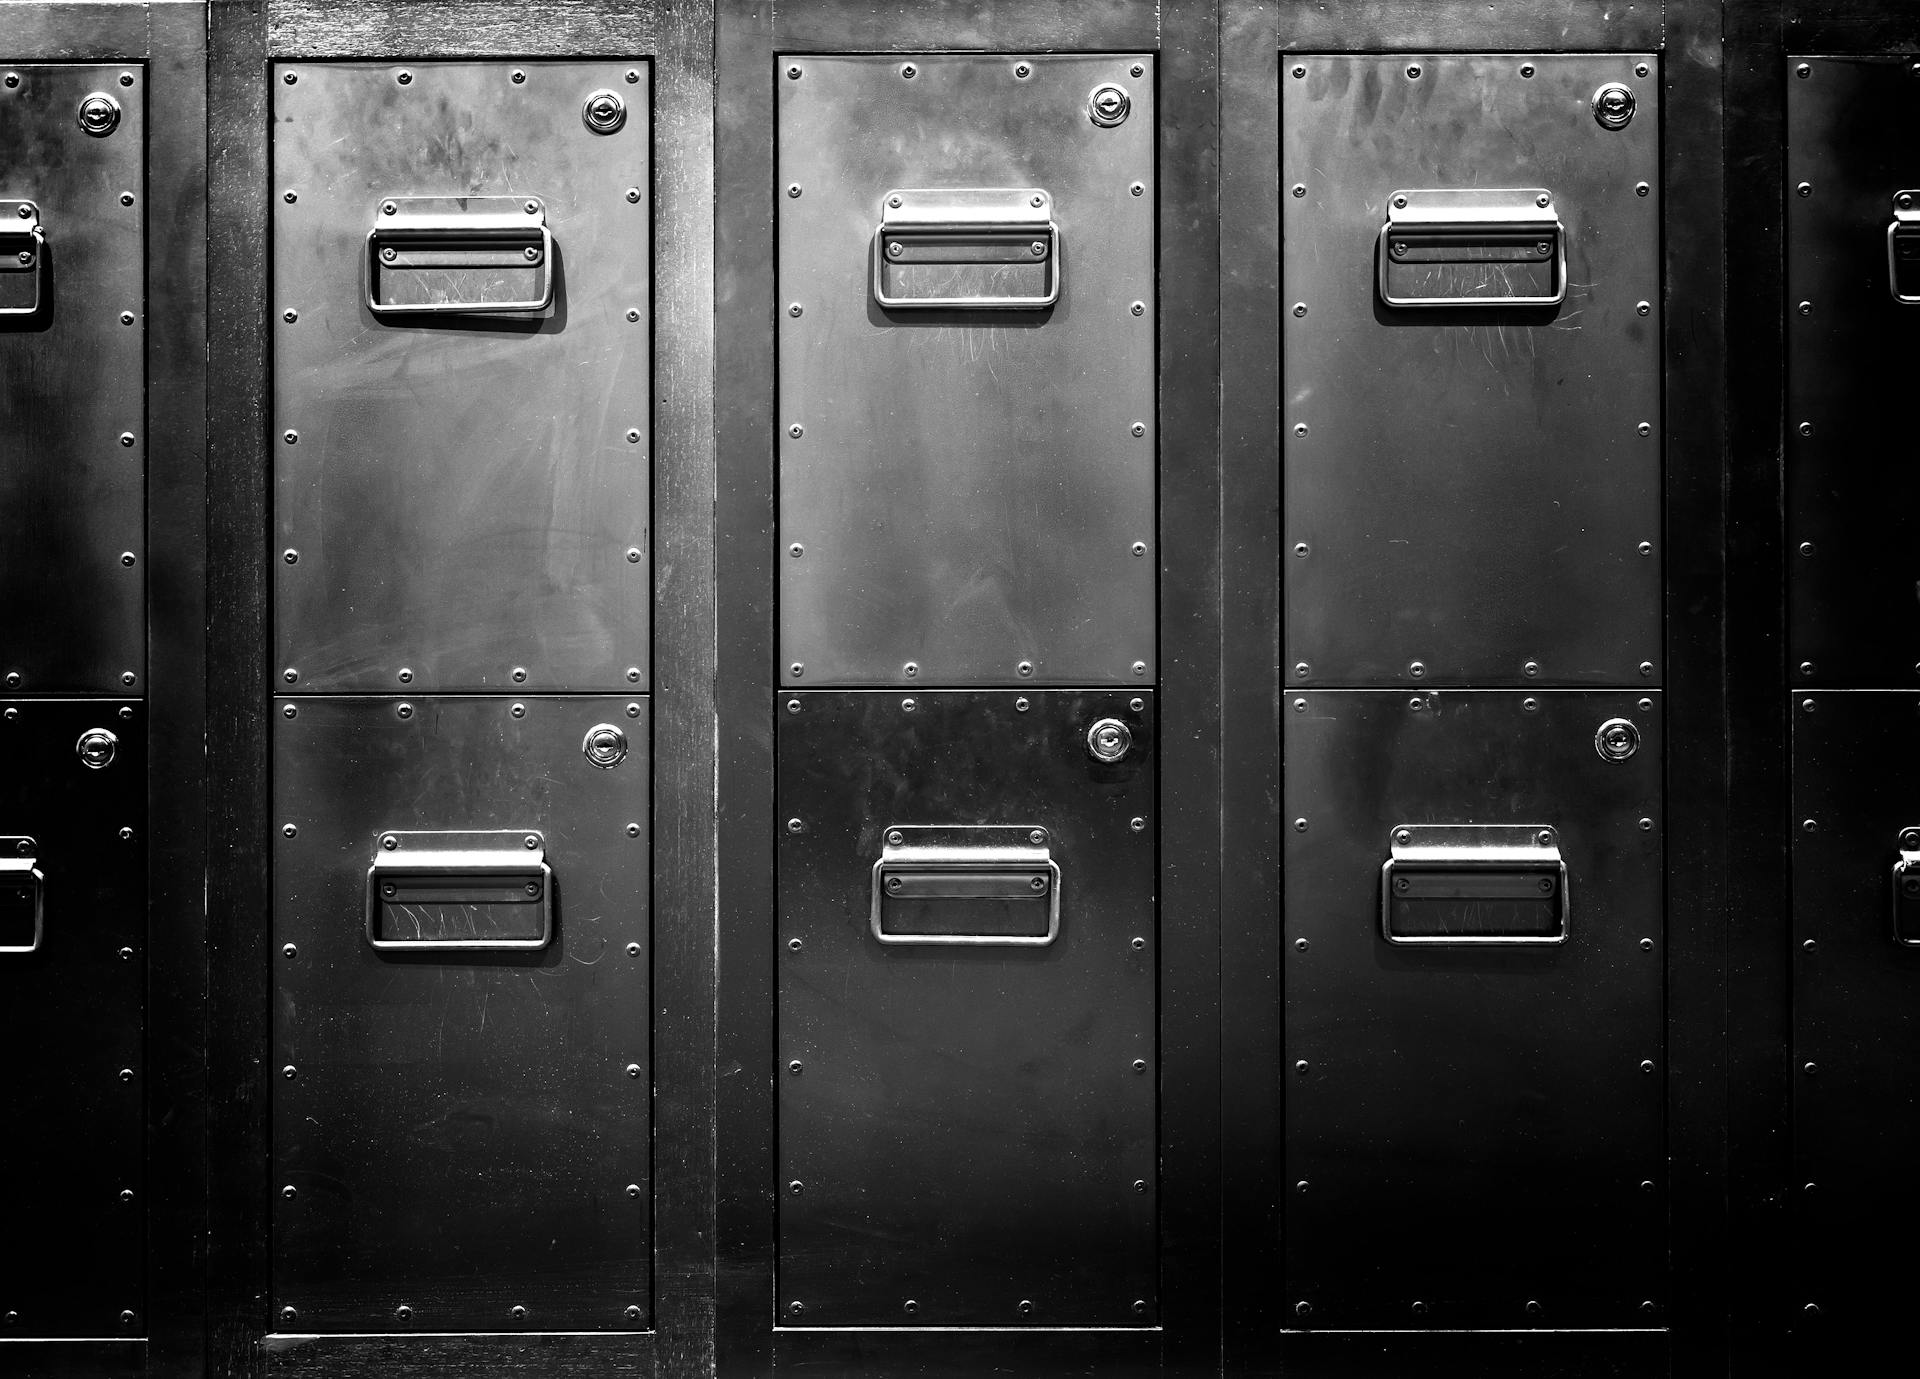 A black and white image showing a wall of old secure filing cabinets